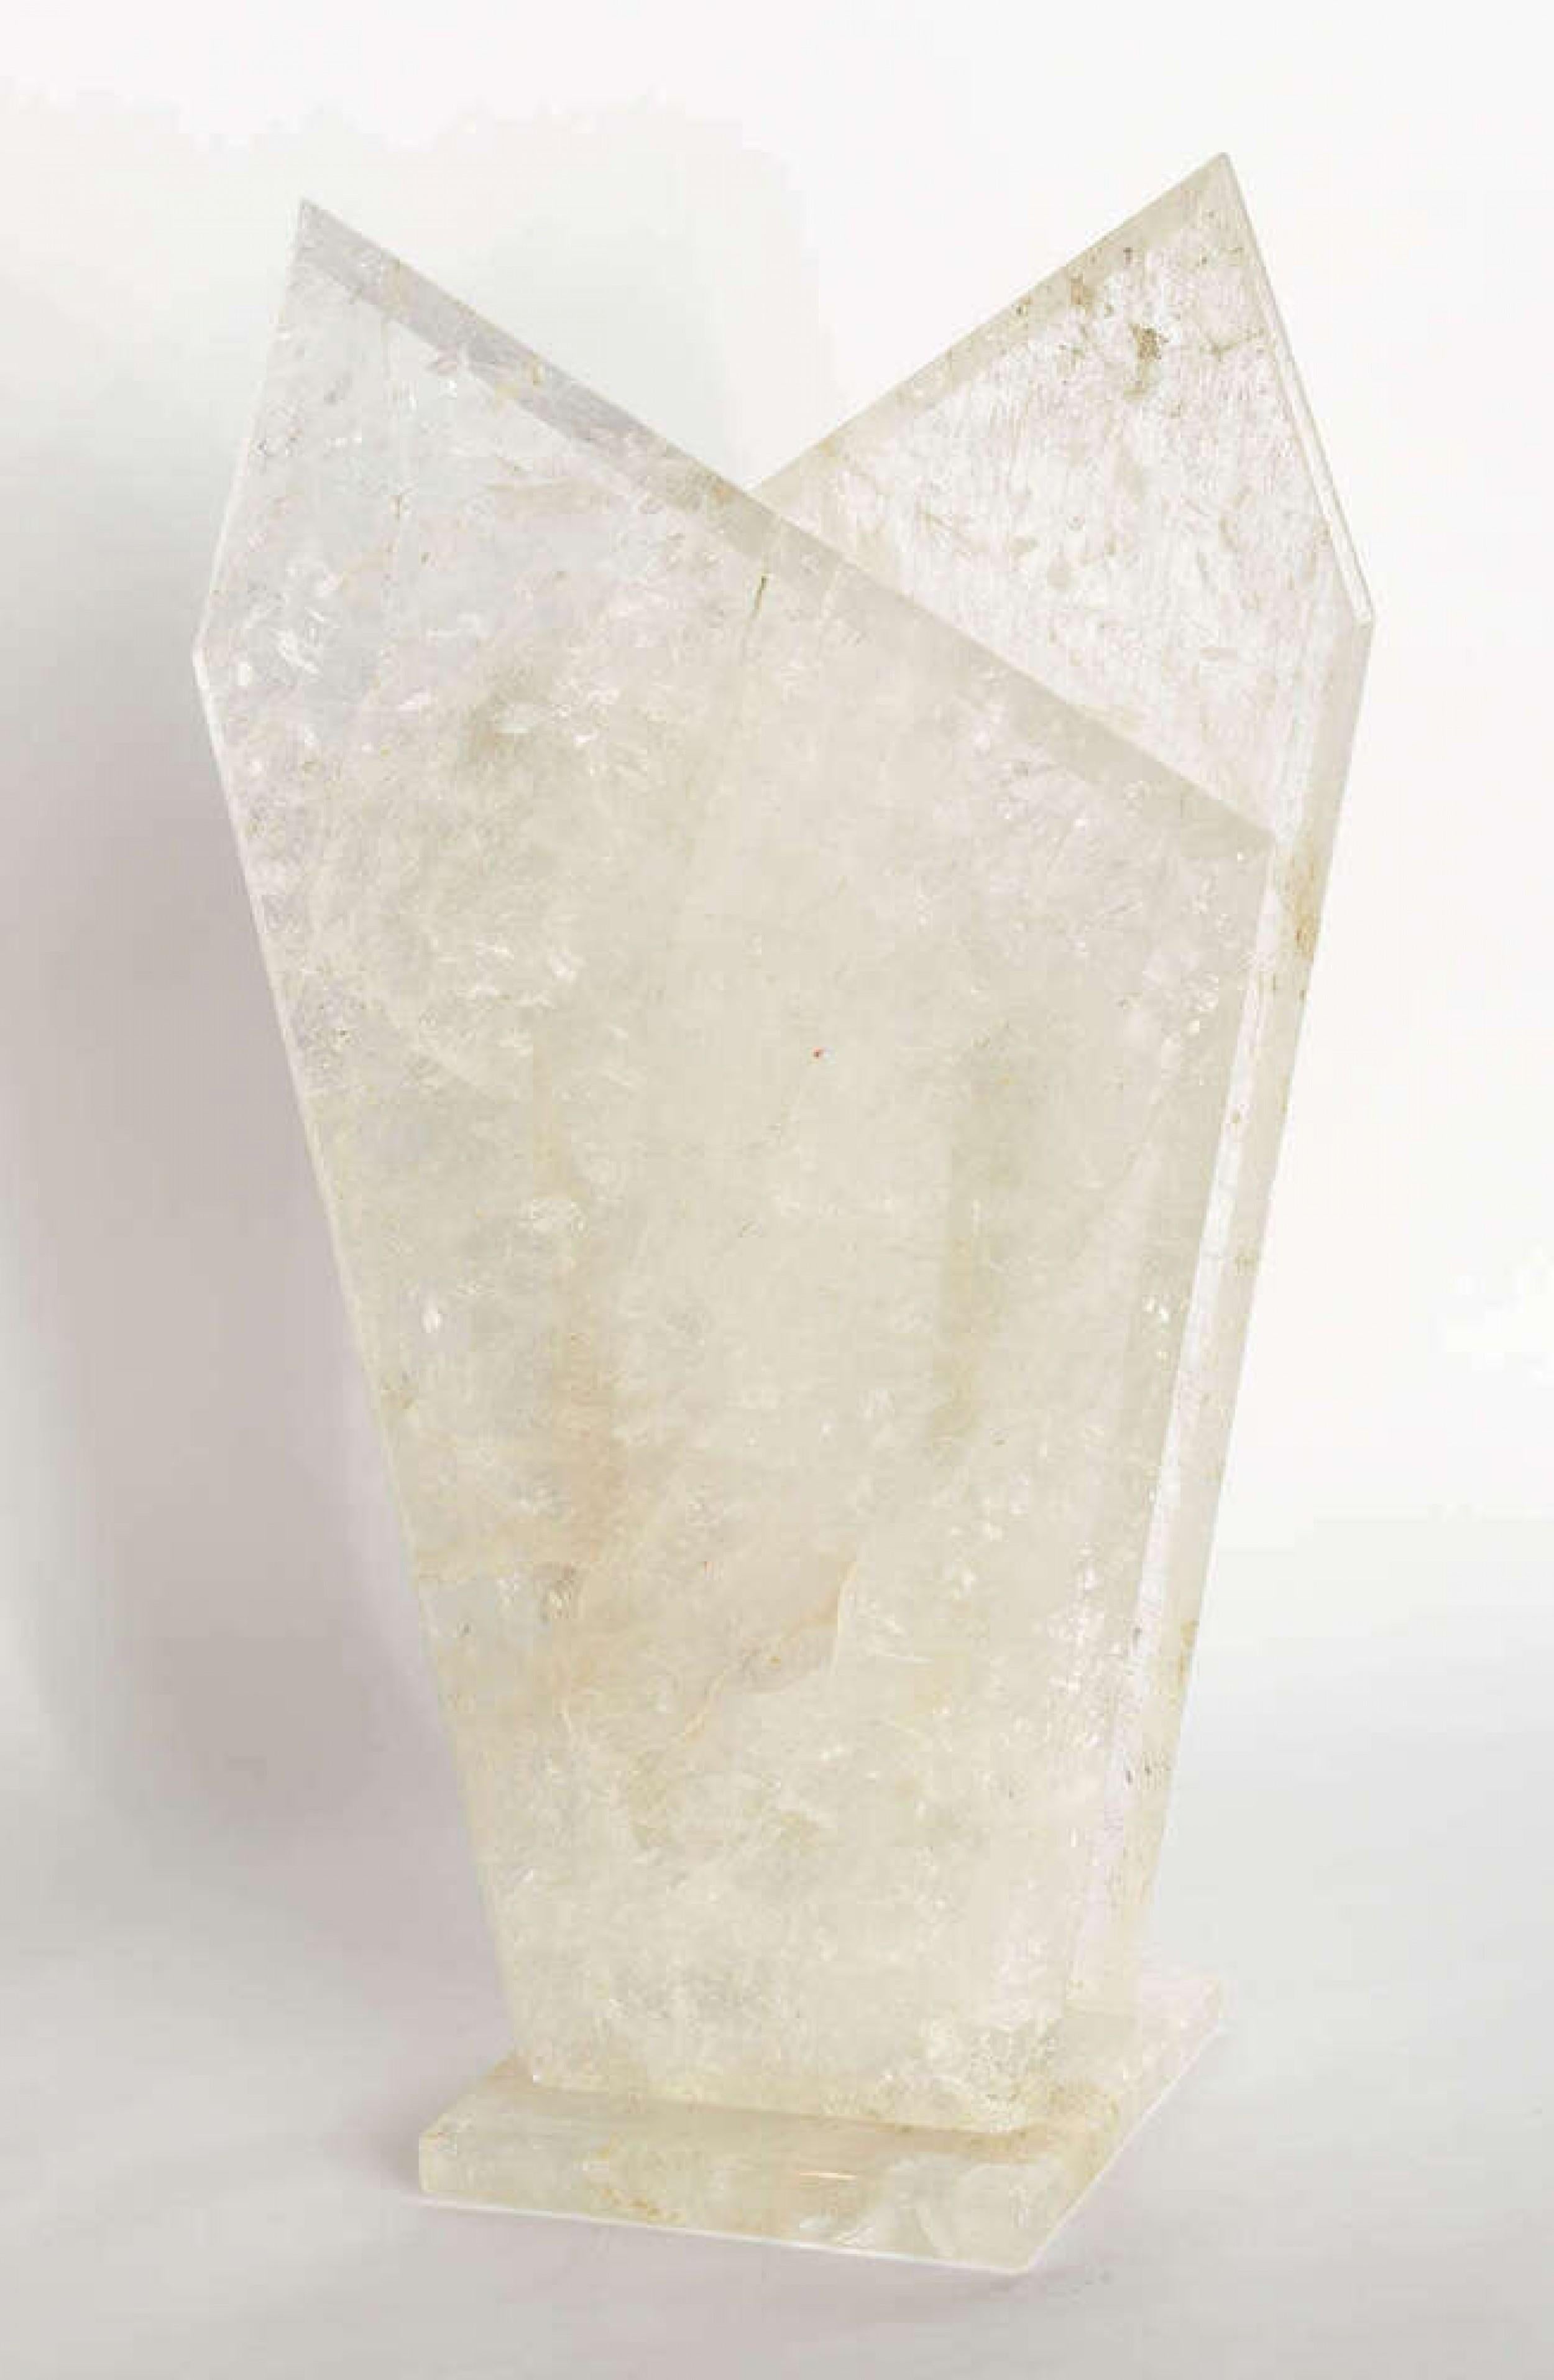 Modern Contemporary American Large Rock Crystal Vase For Sale